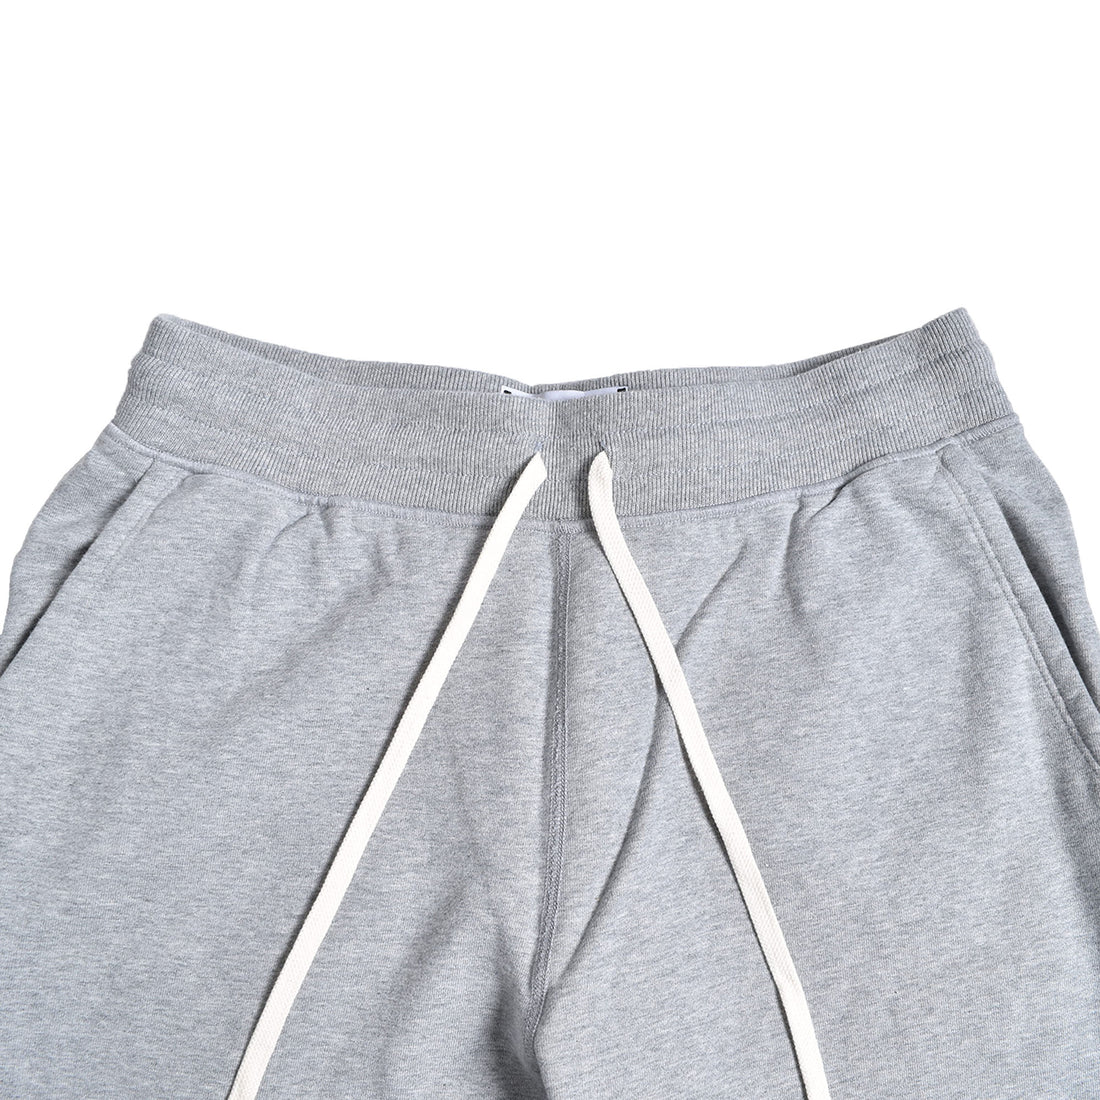 [REIGNING CHAMP]MIDWEIGHT TERRY SLIM SWEATPANT/HATHER GRAY(RC-5075)